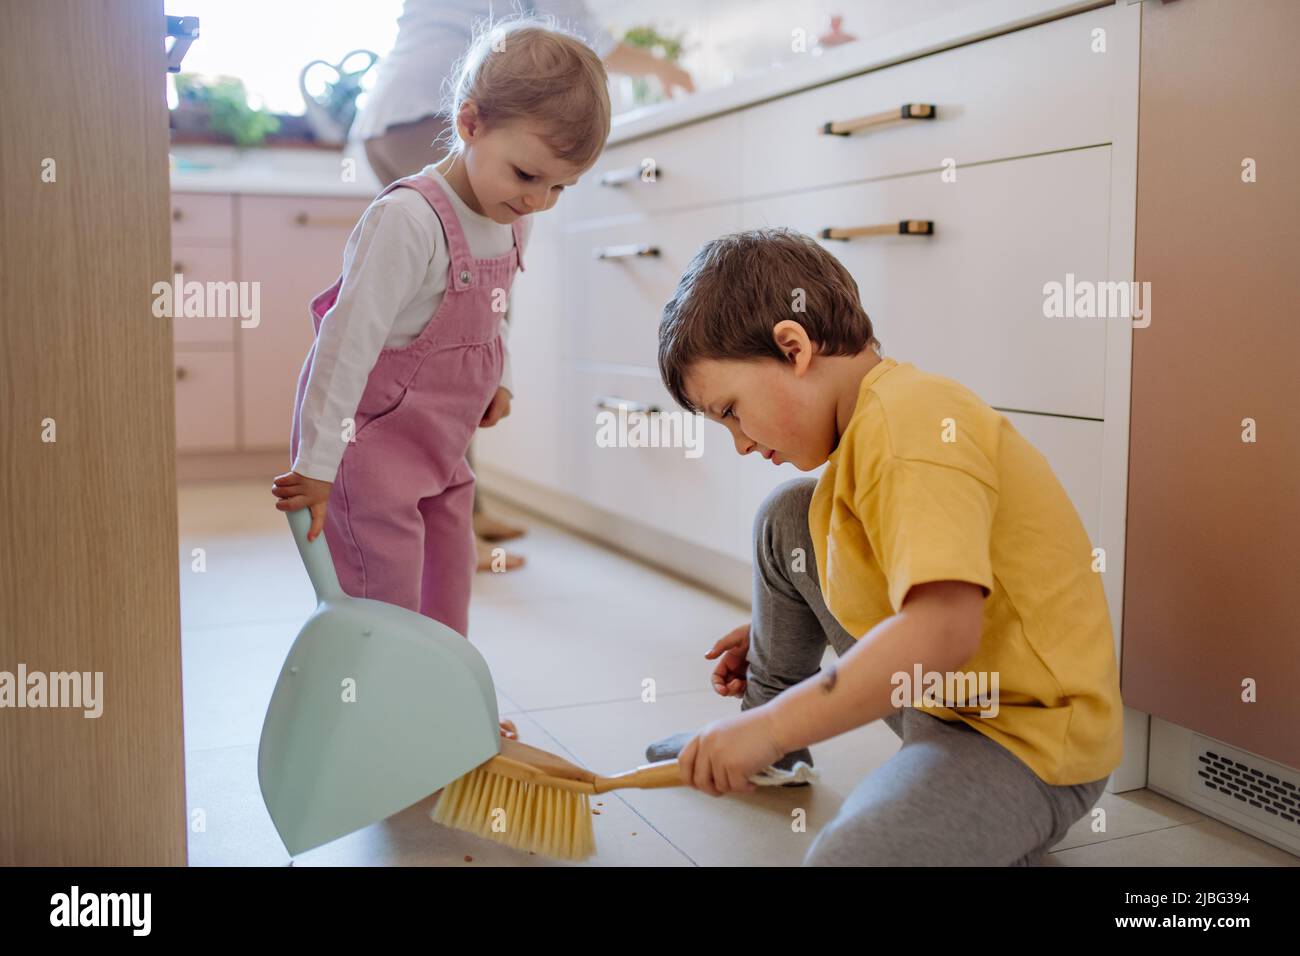 https://c8.alamy.com/comp/2JBG394/little-boy-and-girl-helping-to-clean-house-using-pan-and-brush-as-they-sweep-up-dirt-off-floor-2JBG394.jpg